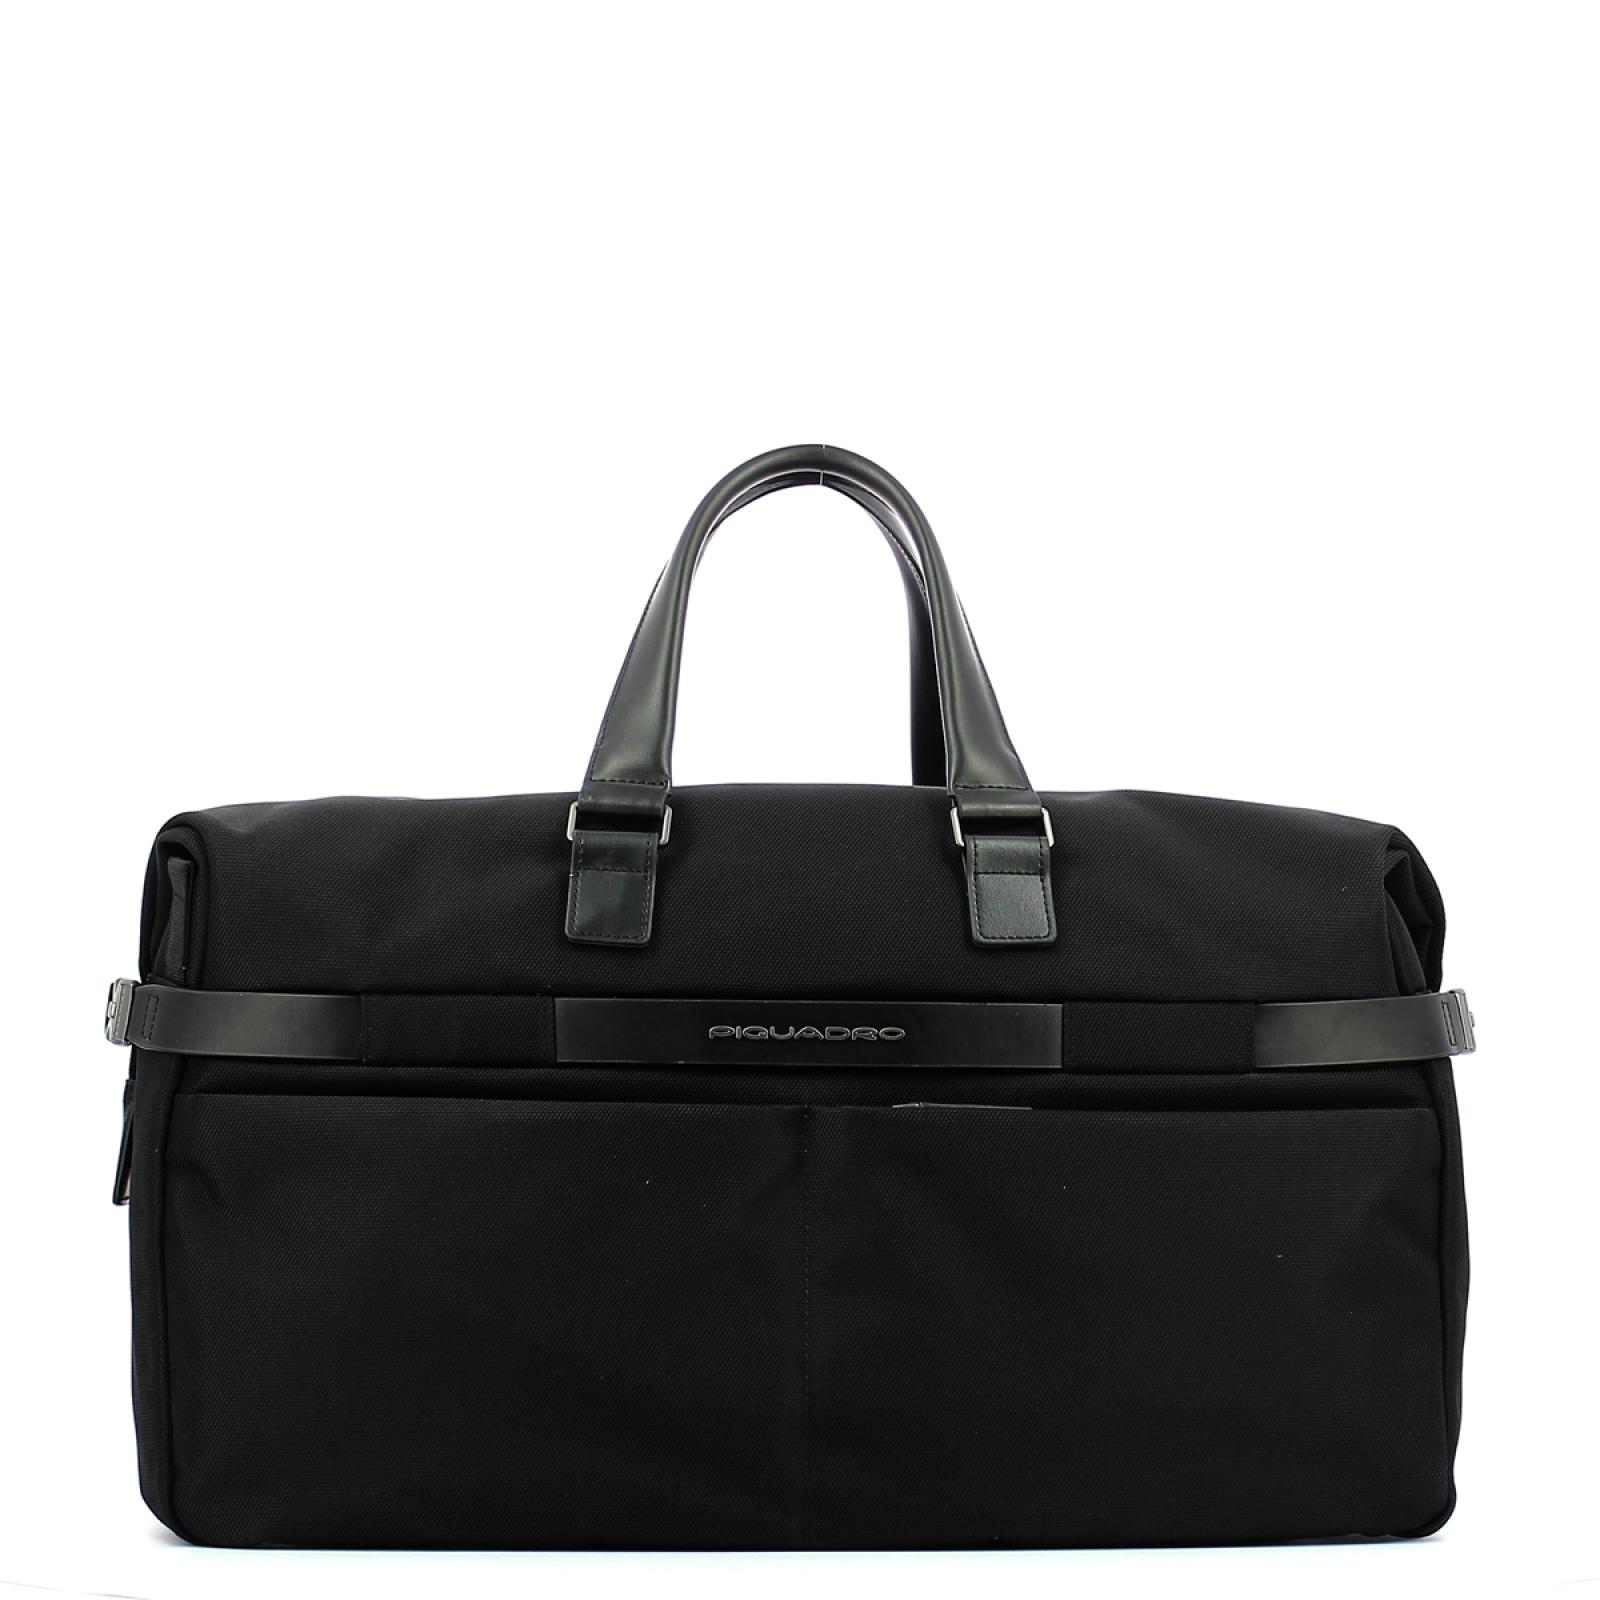 Weekender Move2 with leather handles